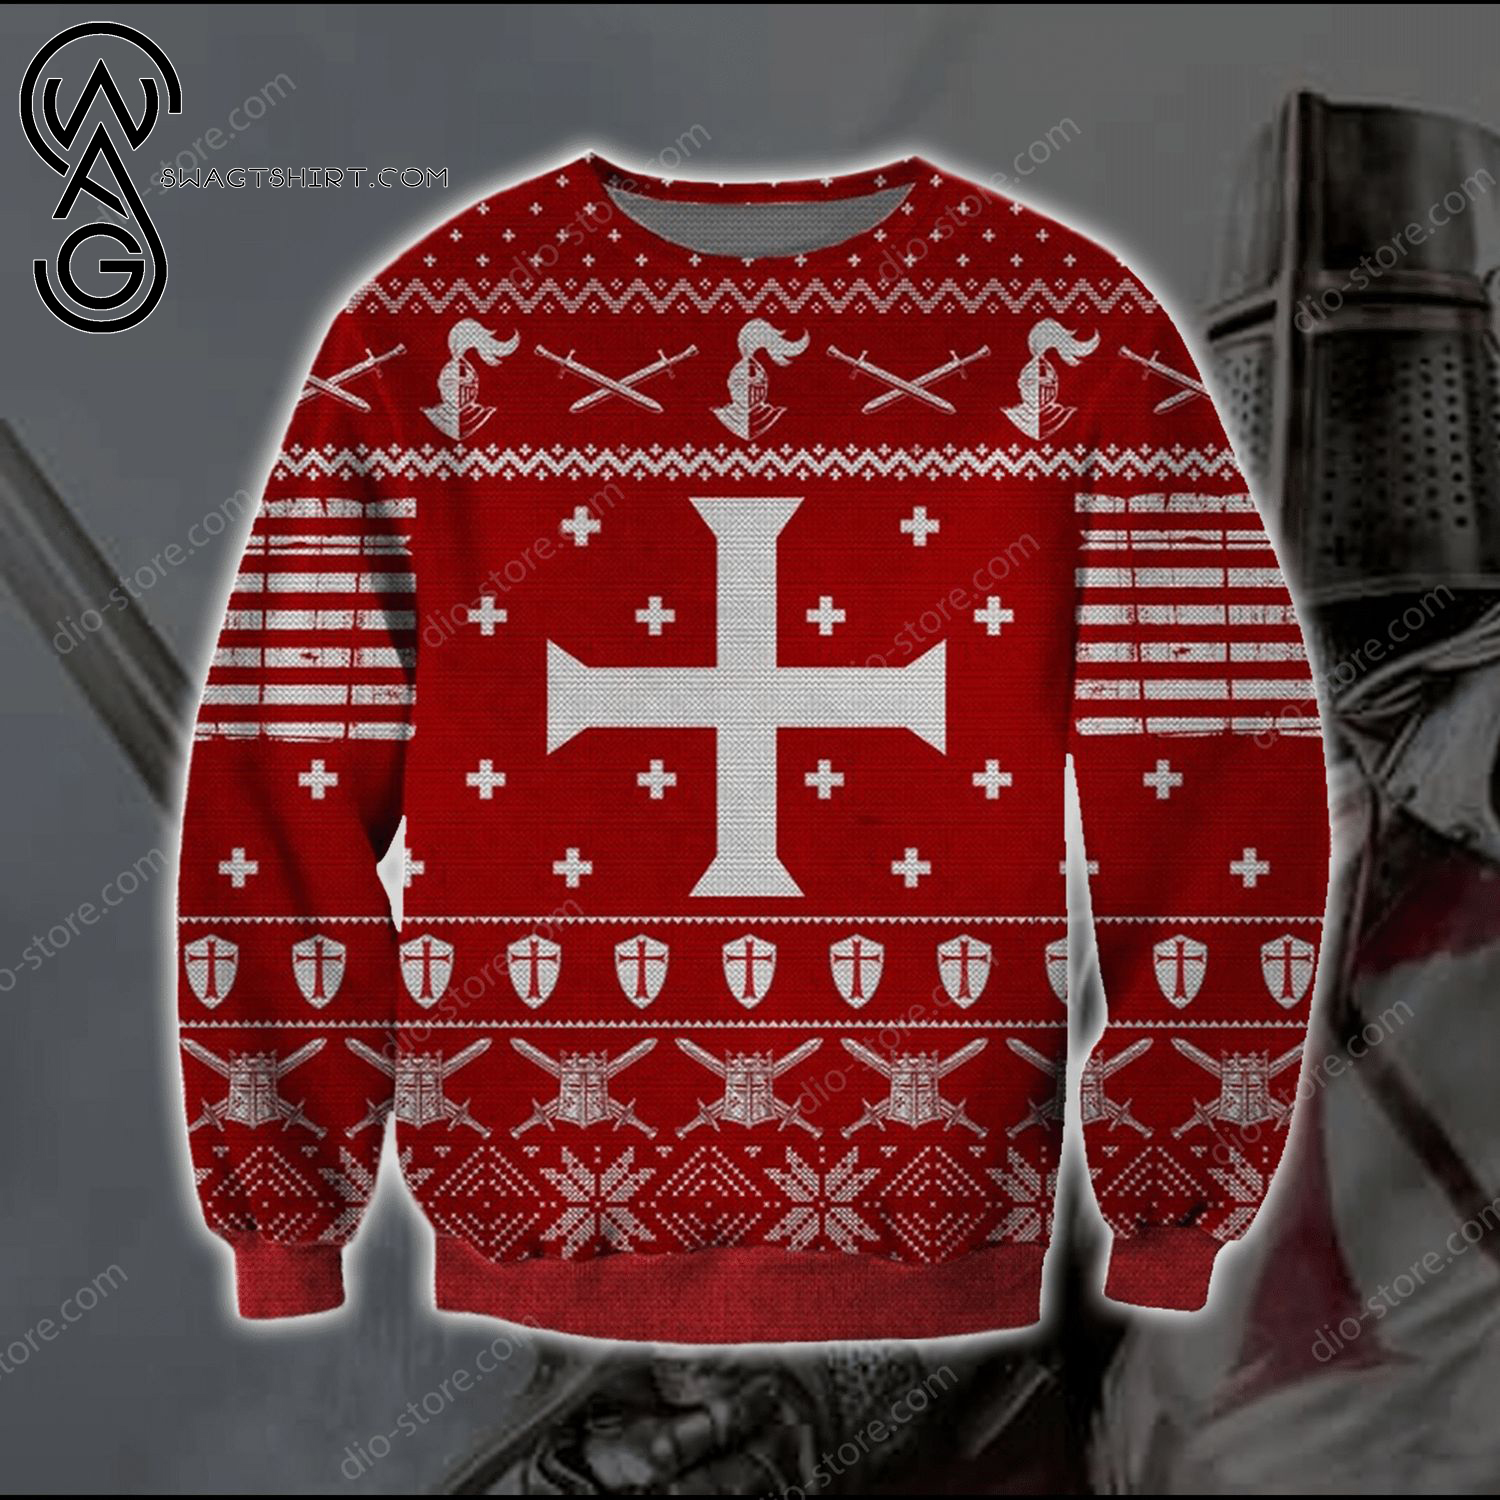 The Knights Templar Full Print Ugly Christmas Sweater